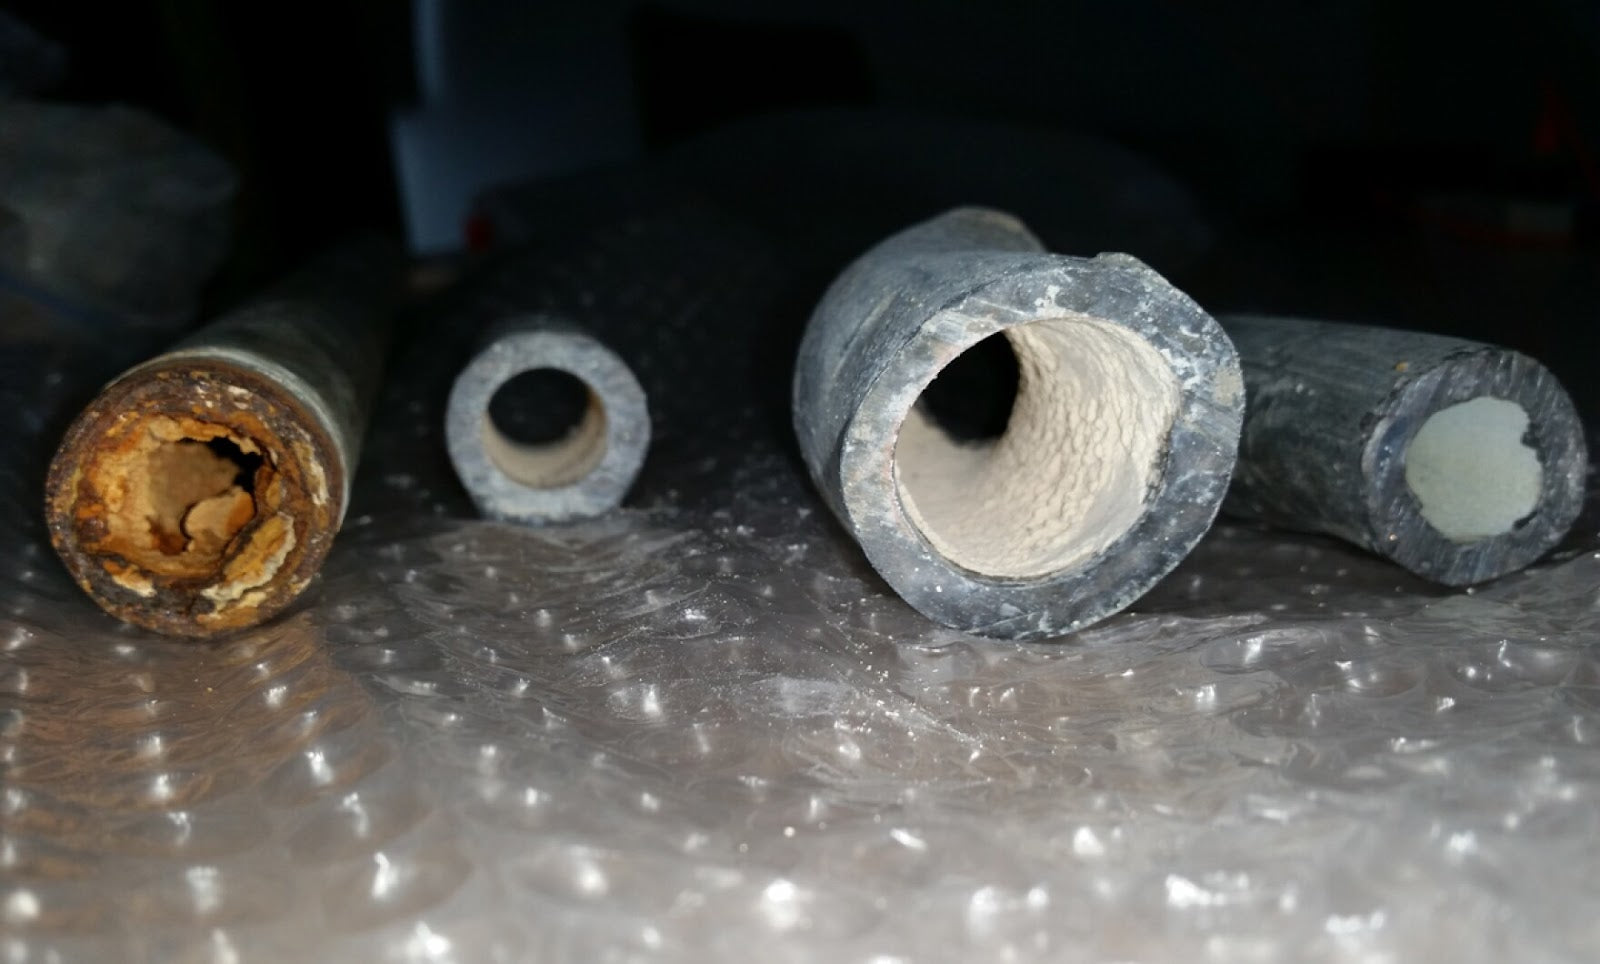 Drinking water pipes without corrosion inhibitor (far left) and with corrosion inhibitor (three remaining pipes with white coating).